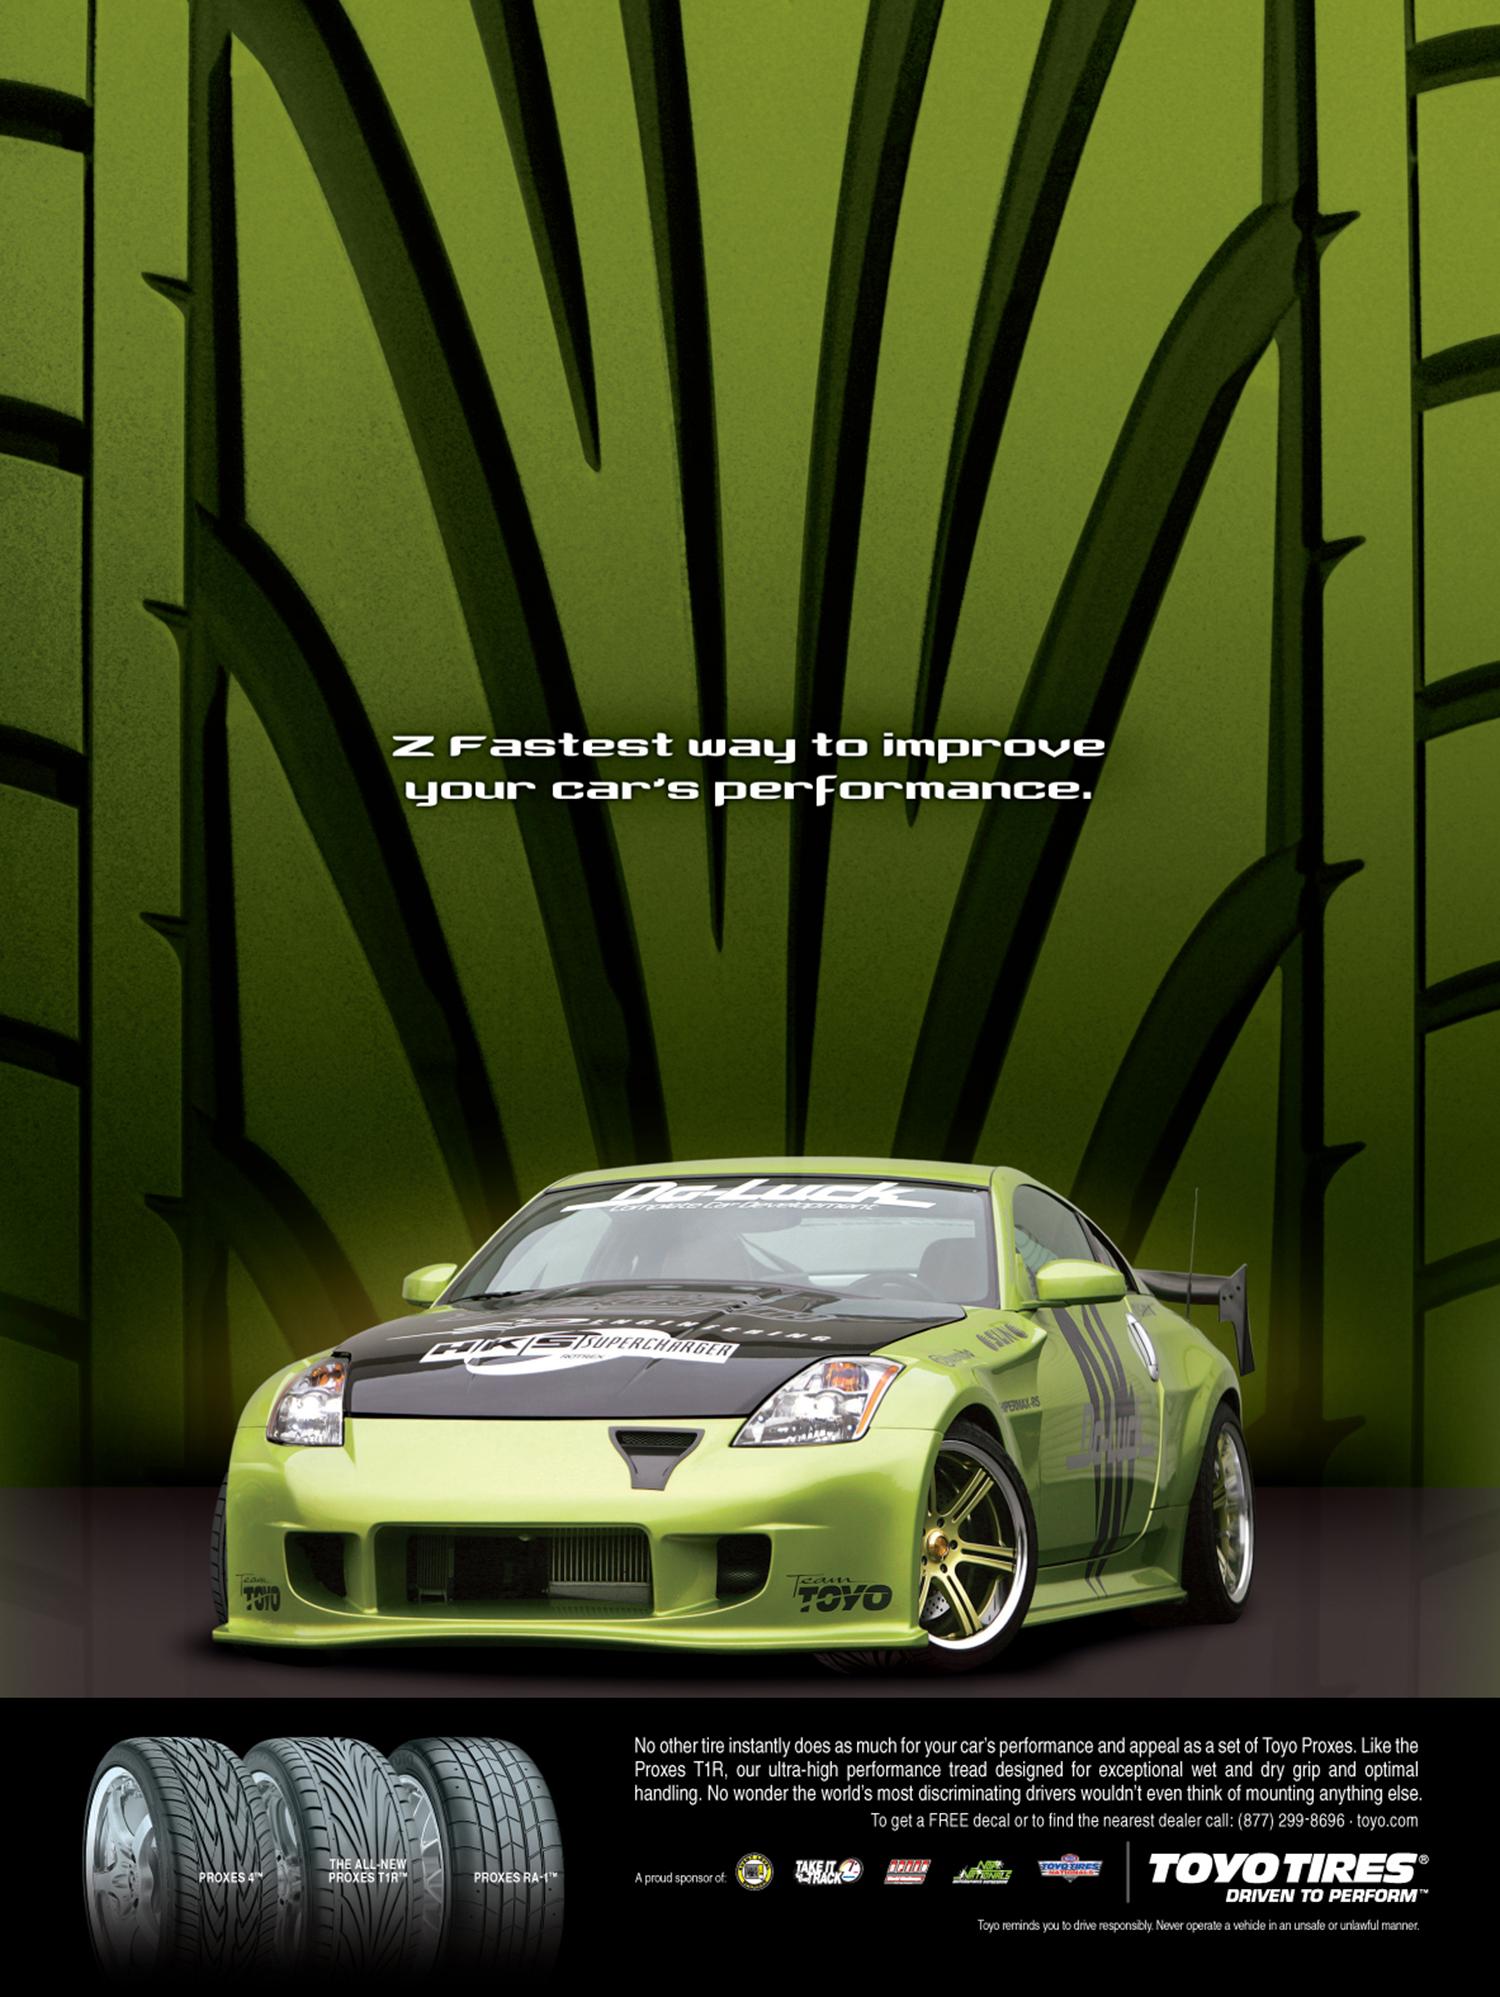 Z fastest way to improve your car’s performance.